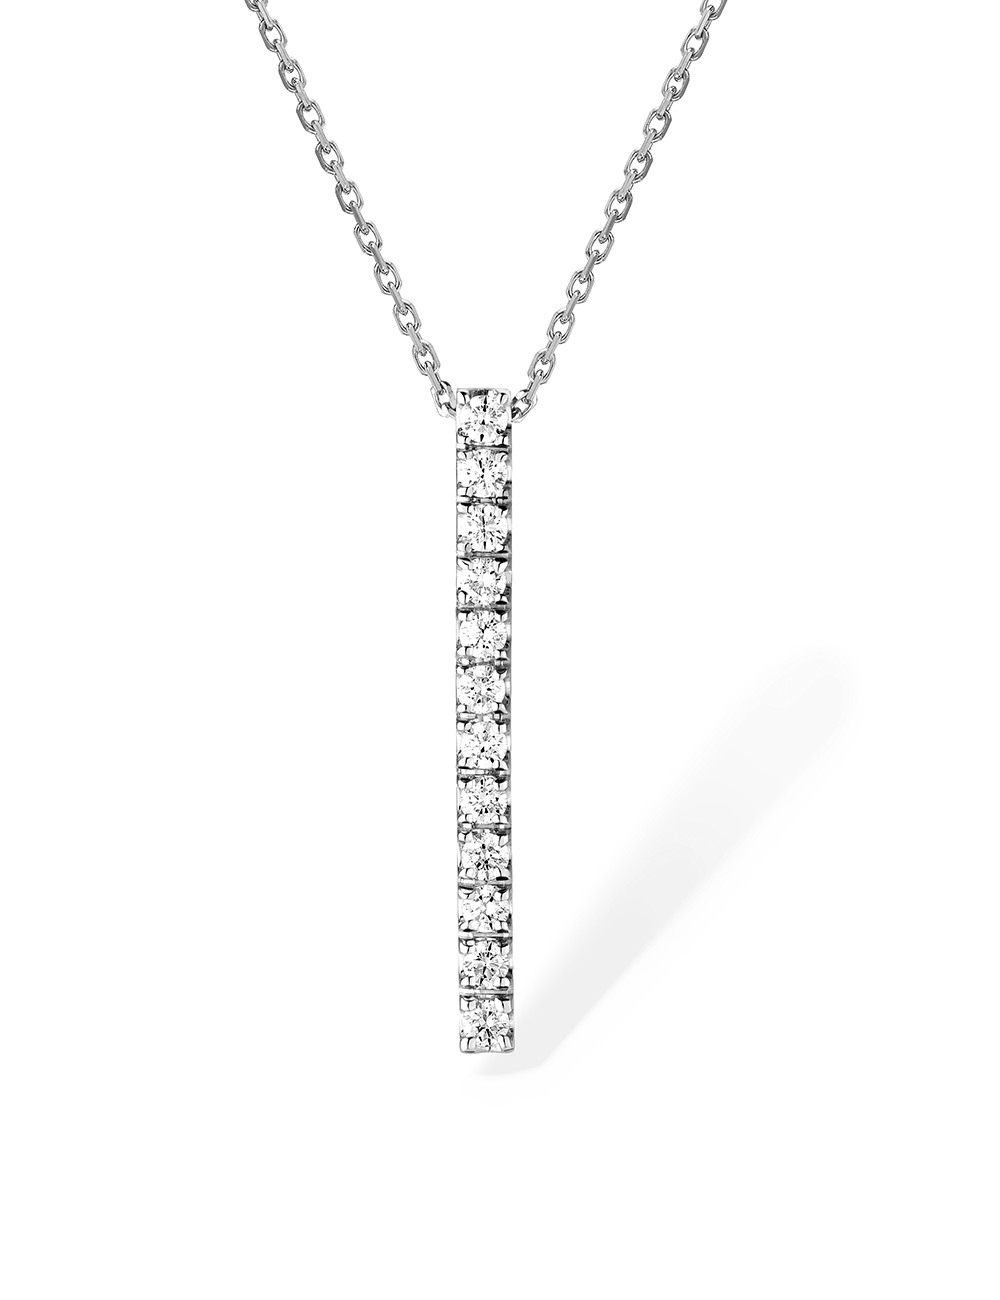 An Exceptional Jewel: Women's white gold bar necklace with 12 sparkling white diamonds.